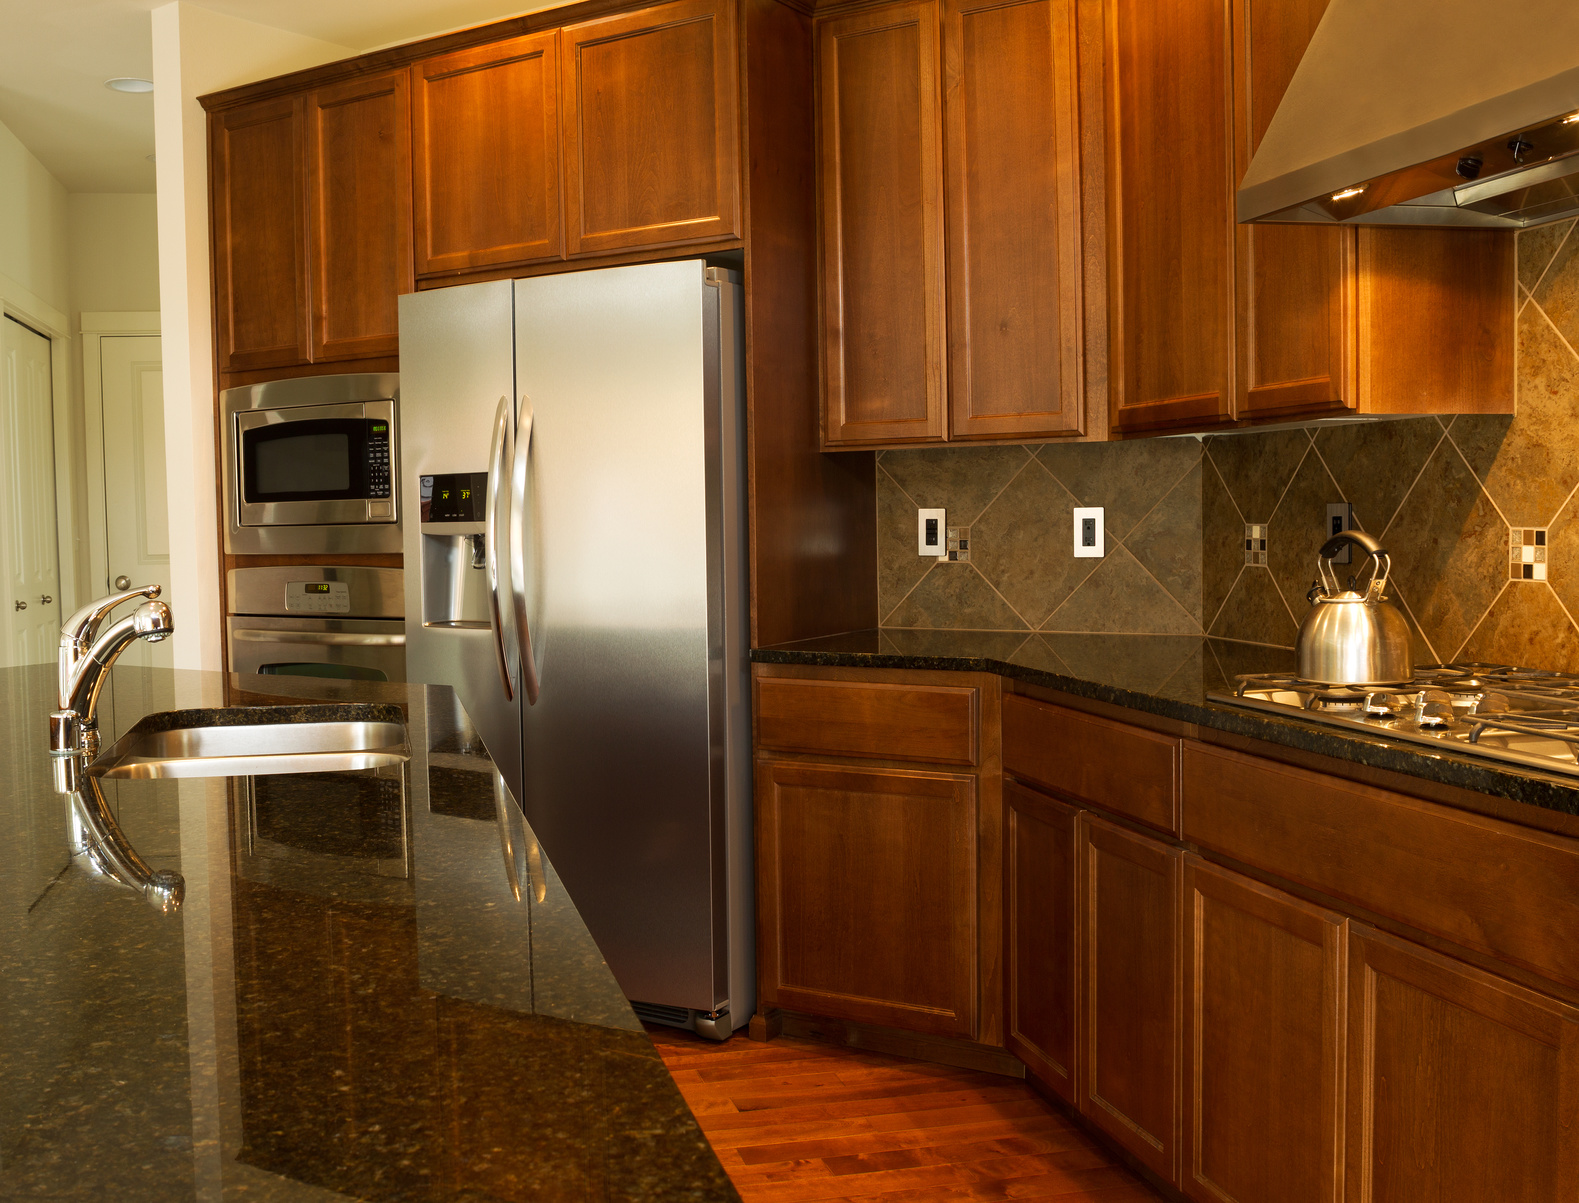 How To Choose Wood Stain Colors For Kitchen Cabinets Estilo